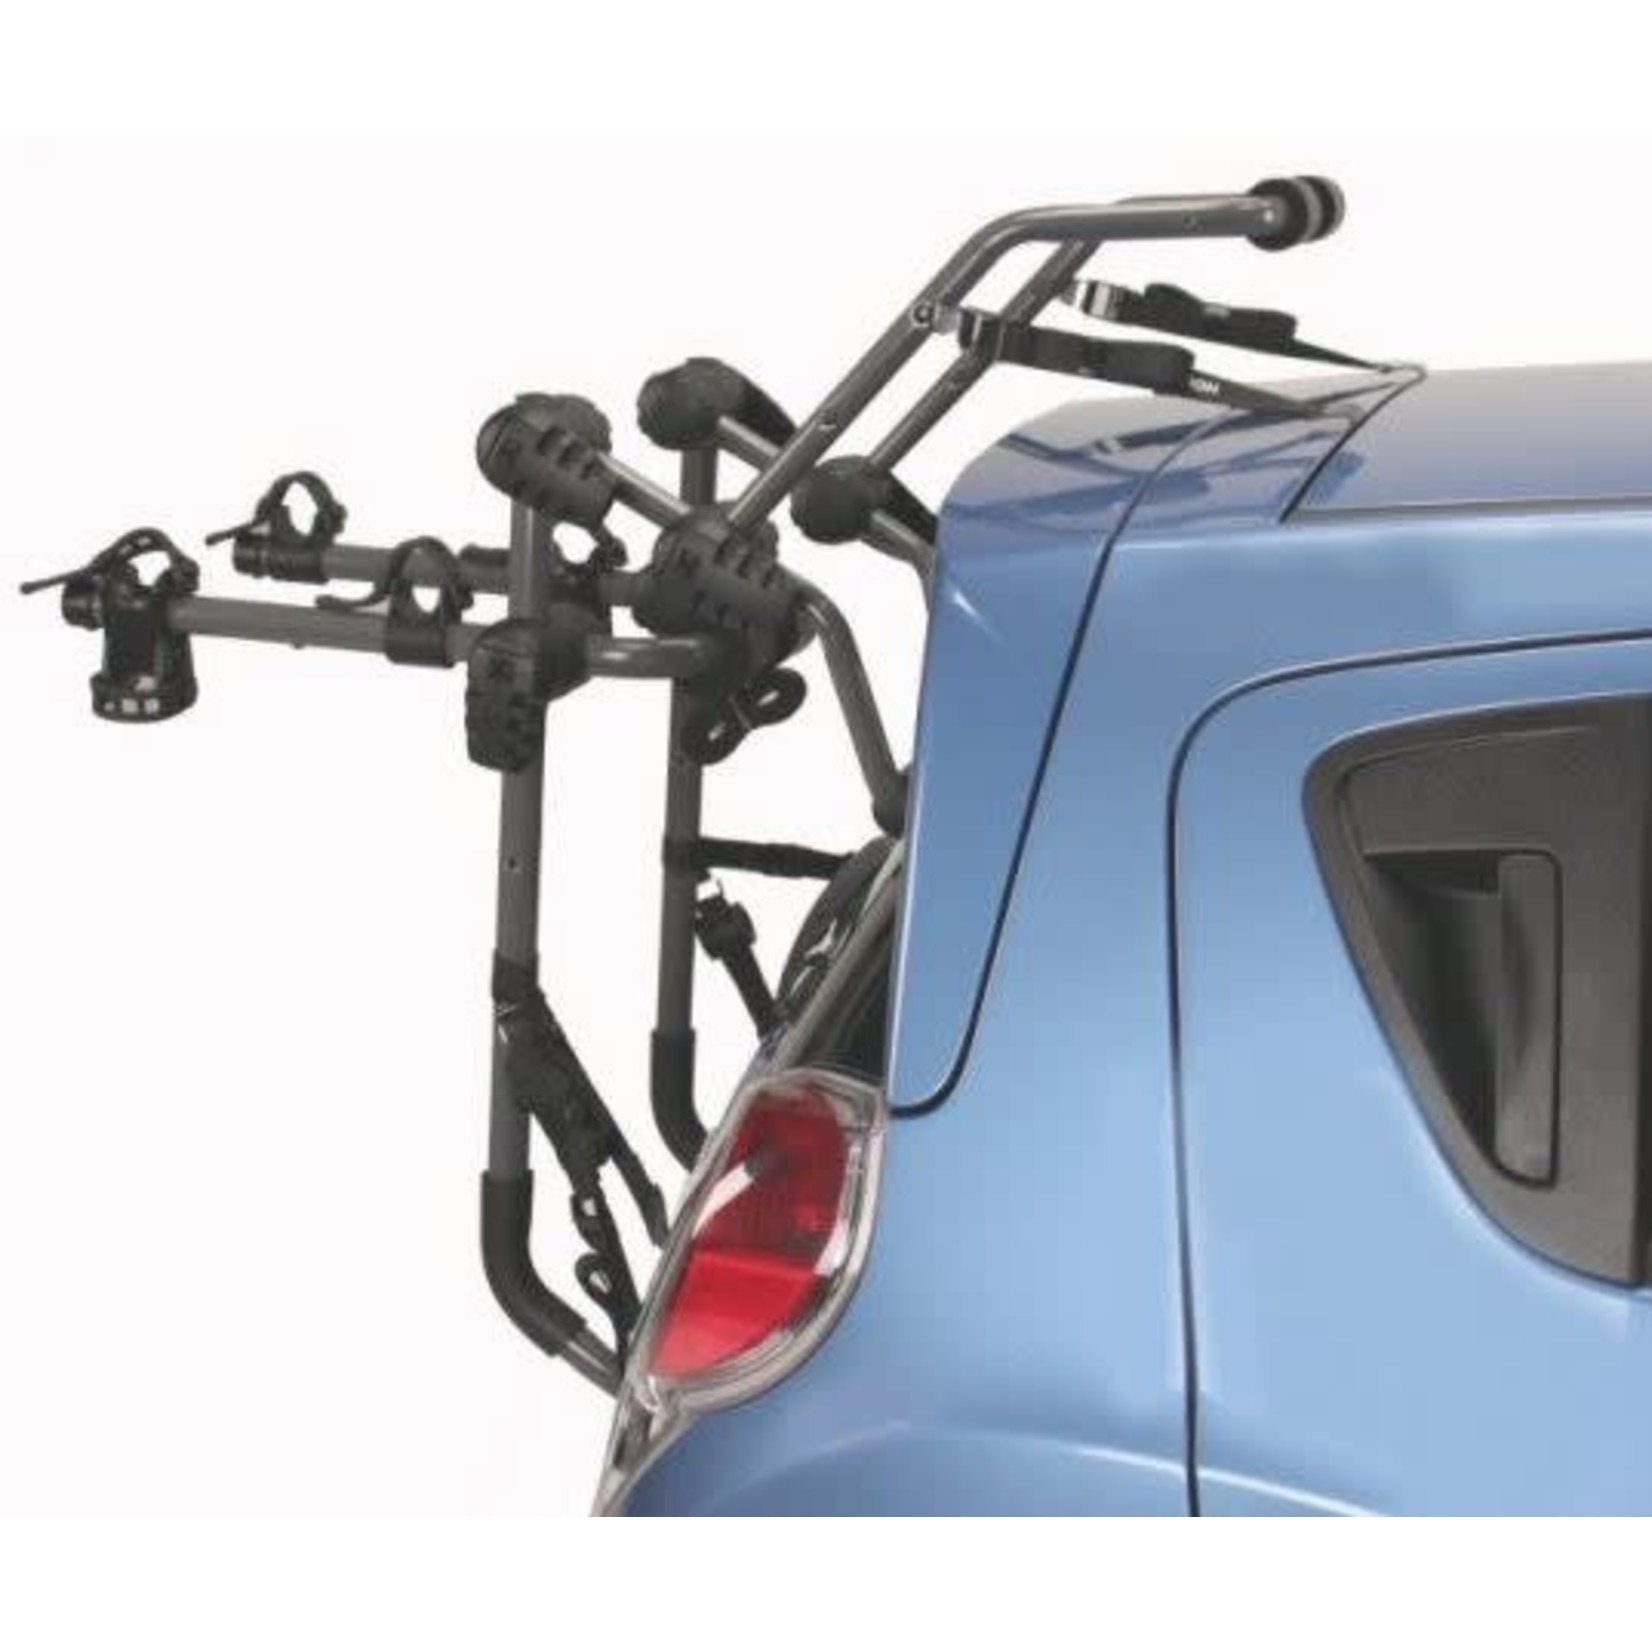 Hollywood Over-The Top F2 3-Bike Trunk Rack